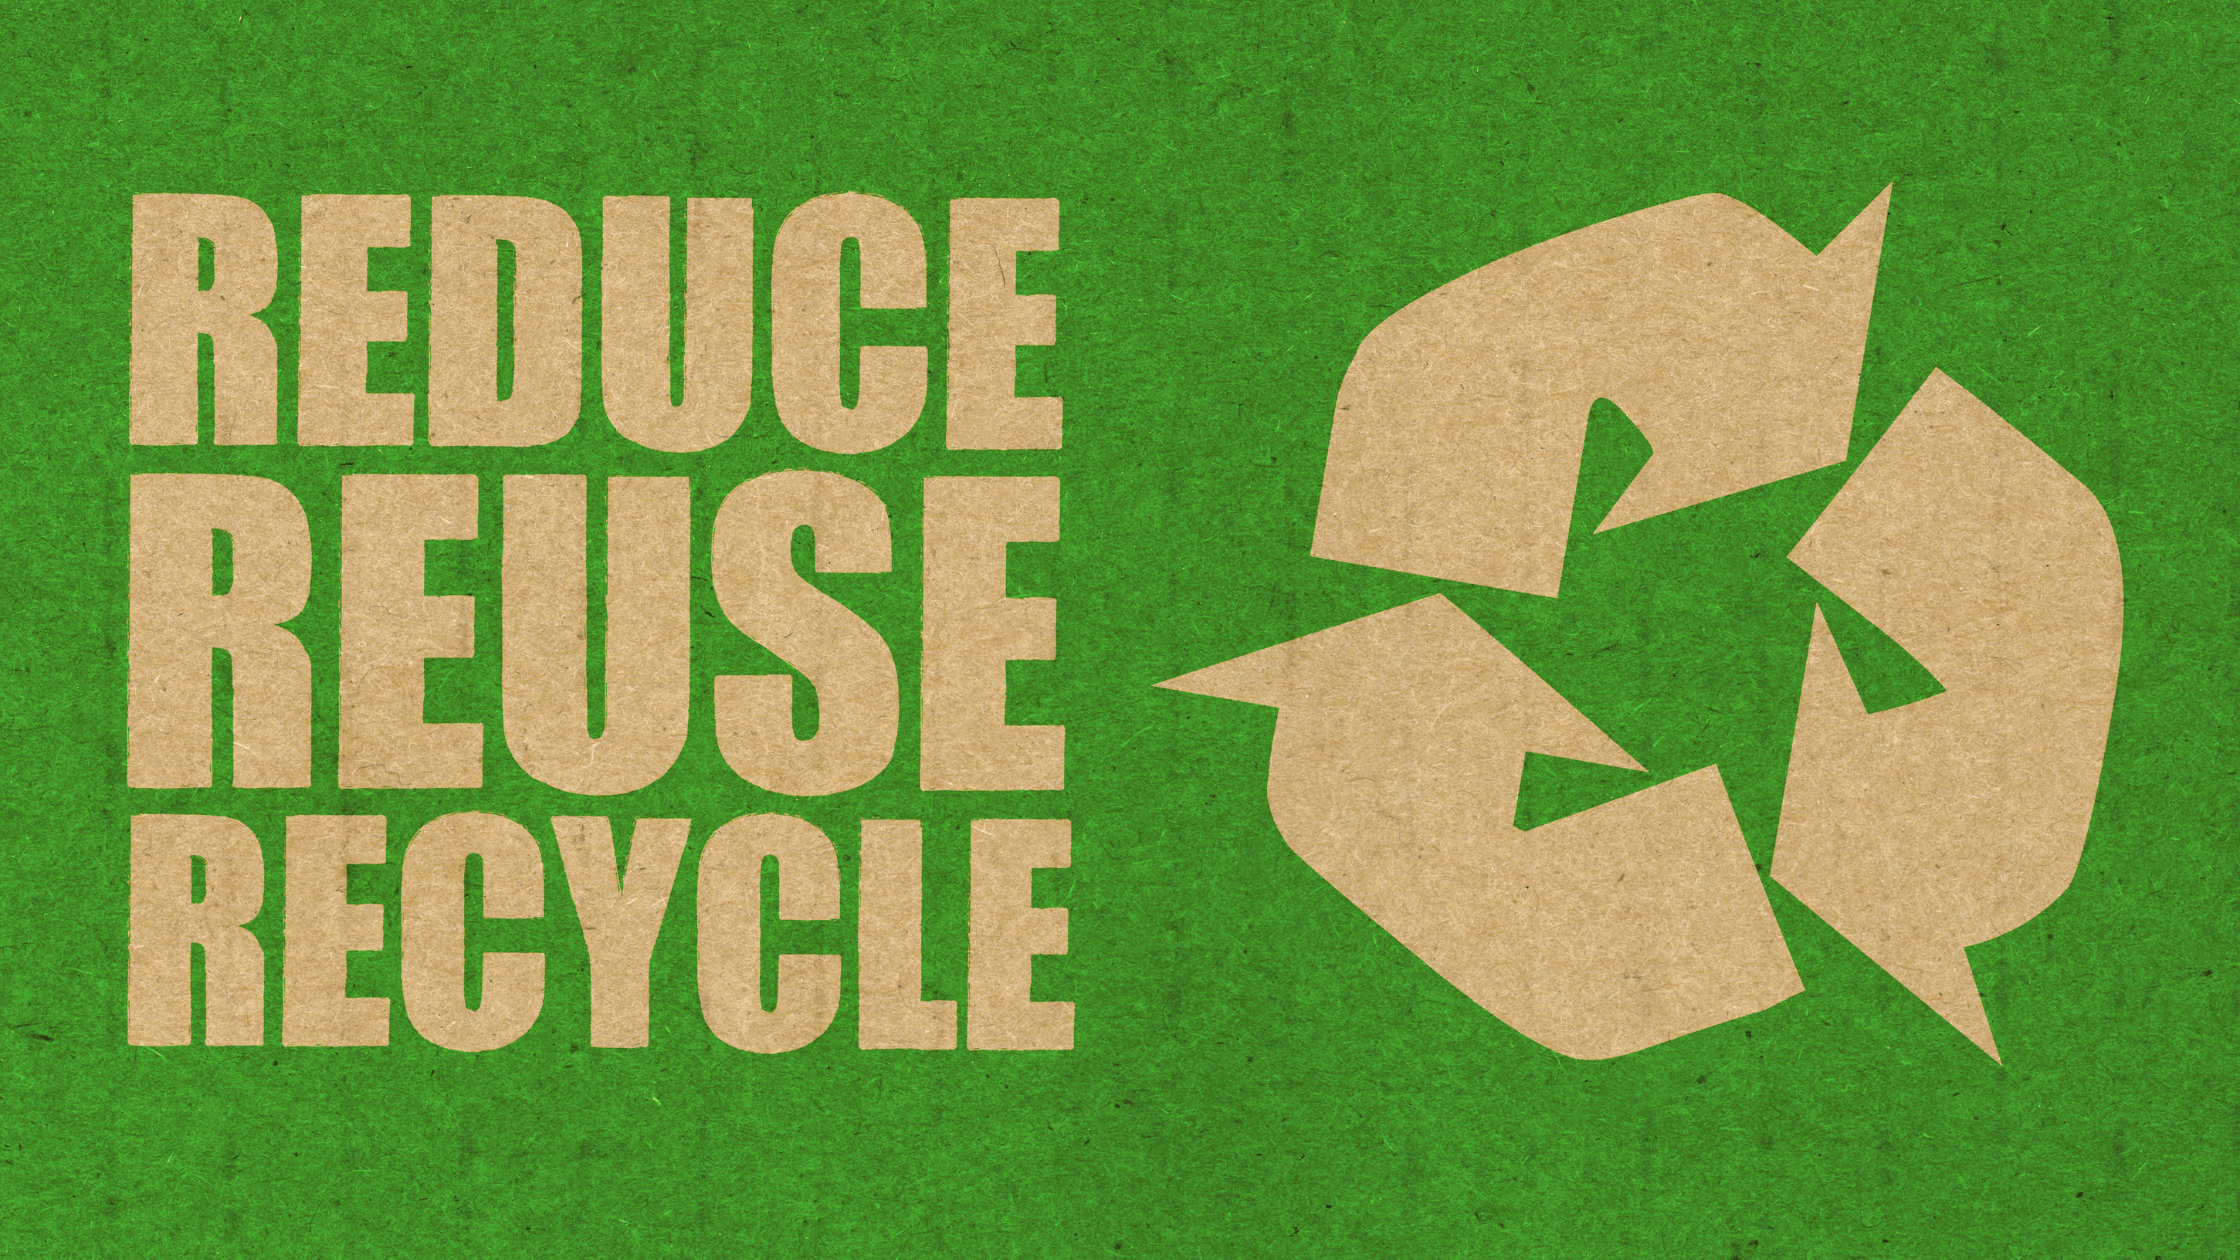 How to reduce waste – Reduce, reuse, recycle